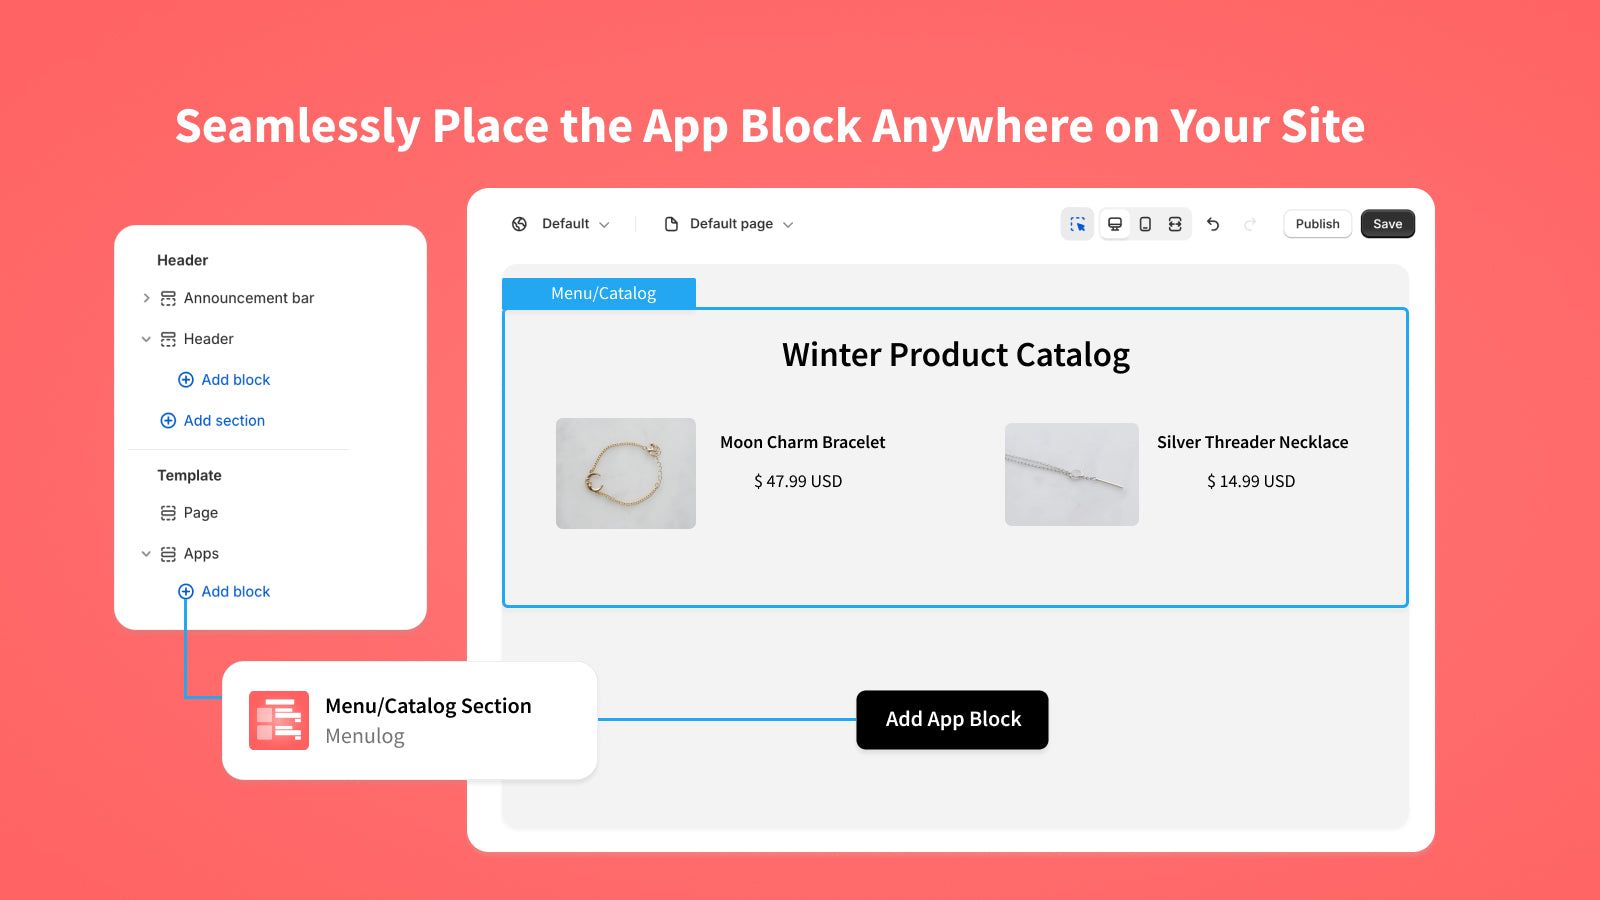 Seamlessly Place the App Block Anywhere on Your Site